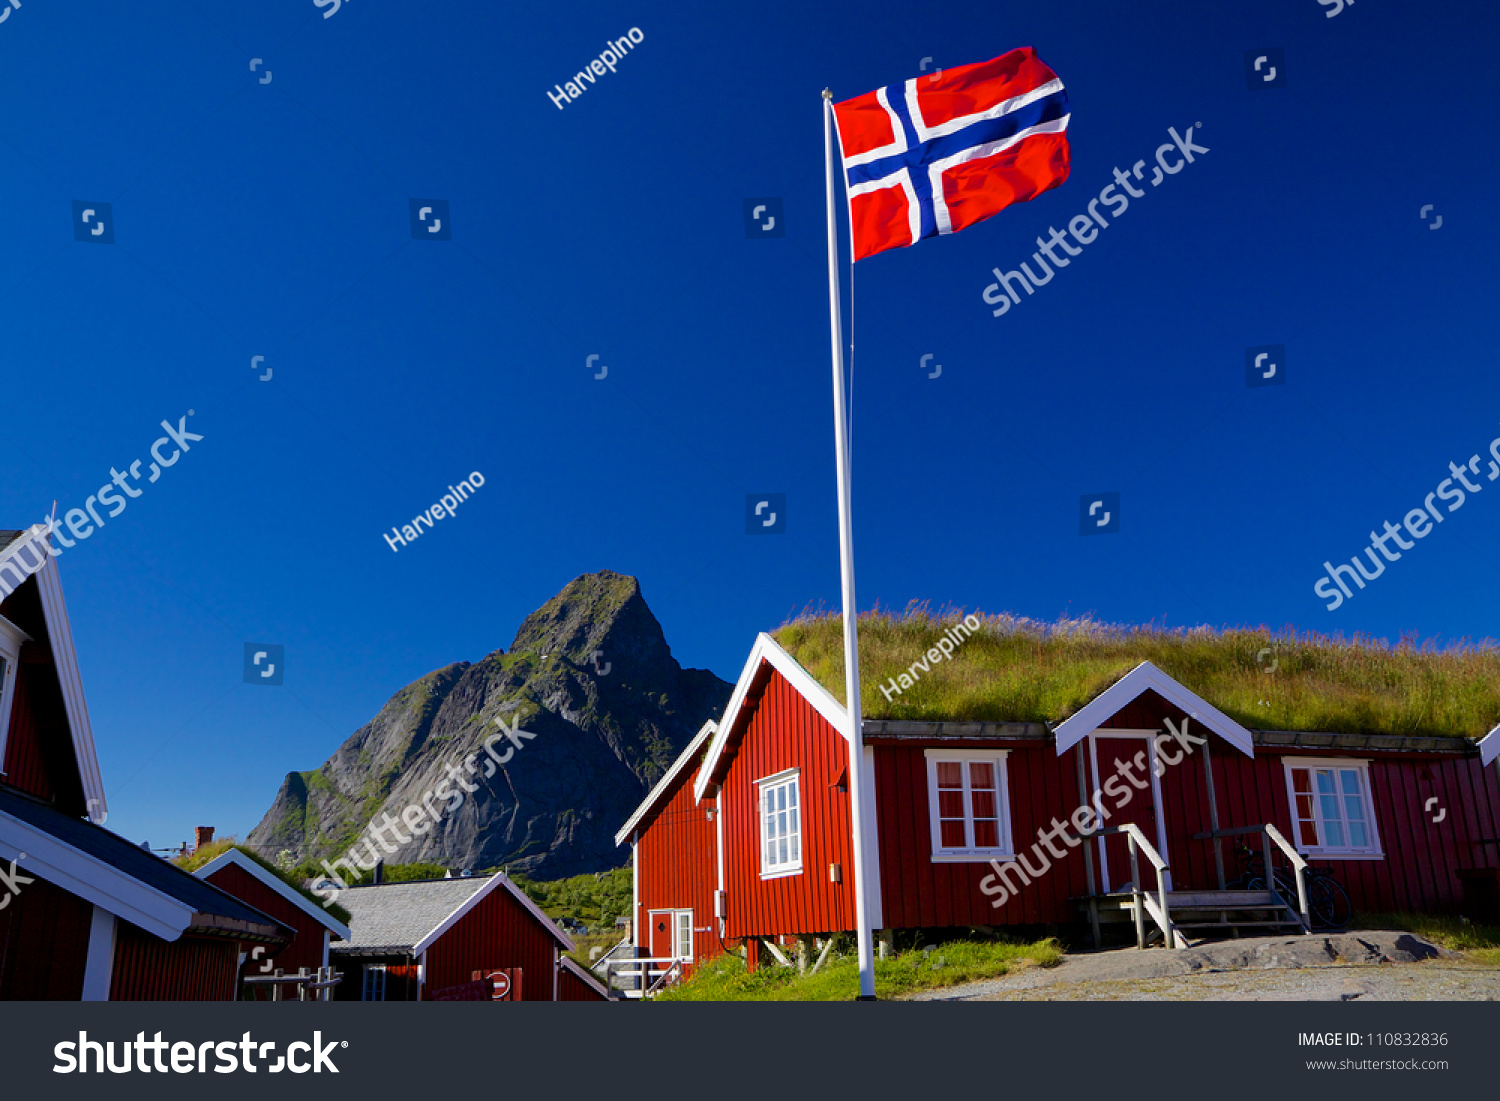 Norwegian flag with typical norwegian red wooden house with sod roof on Lofoten islands #110832836